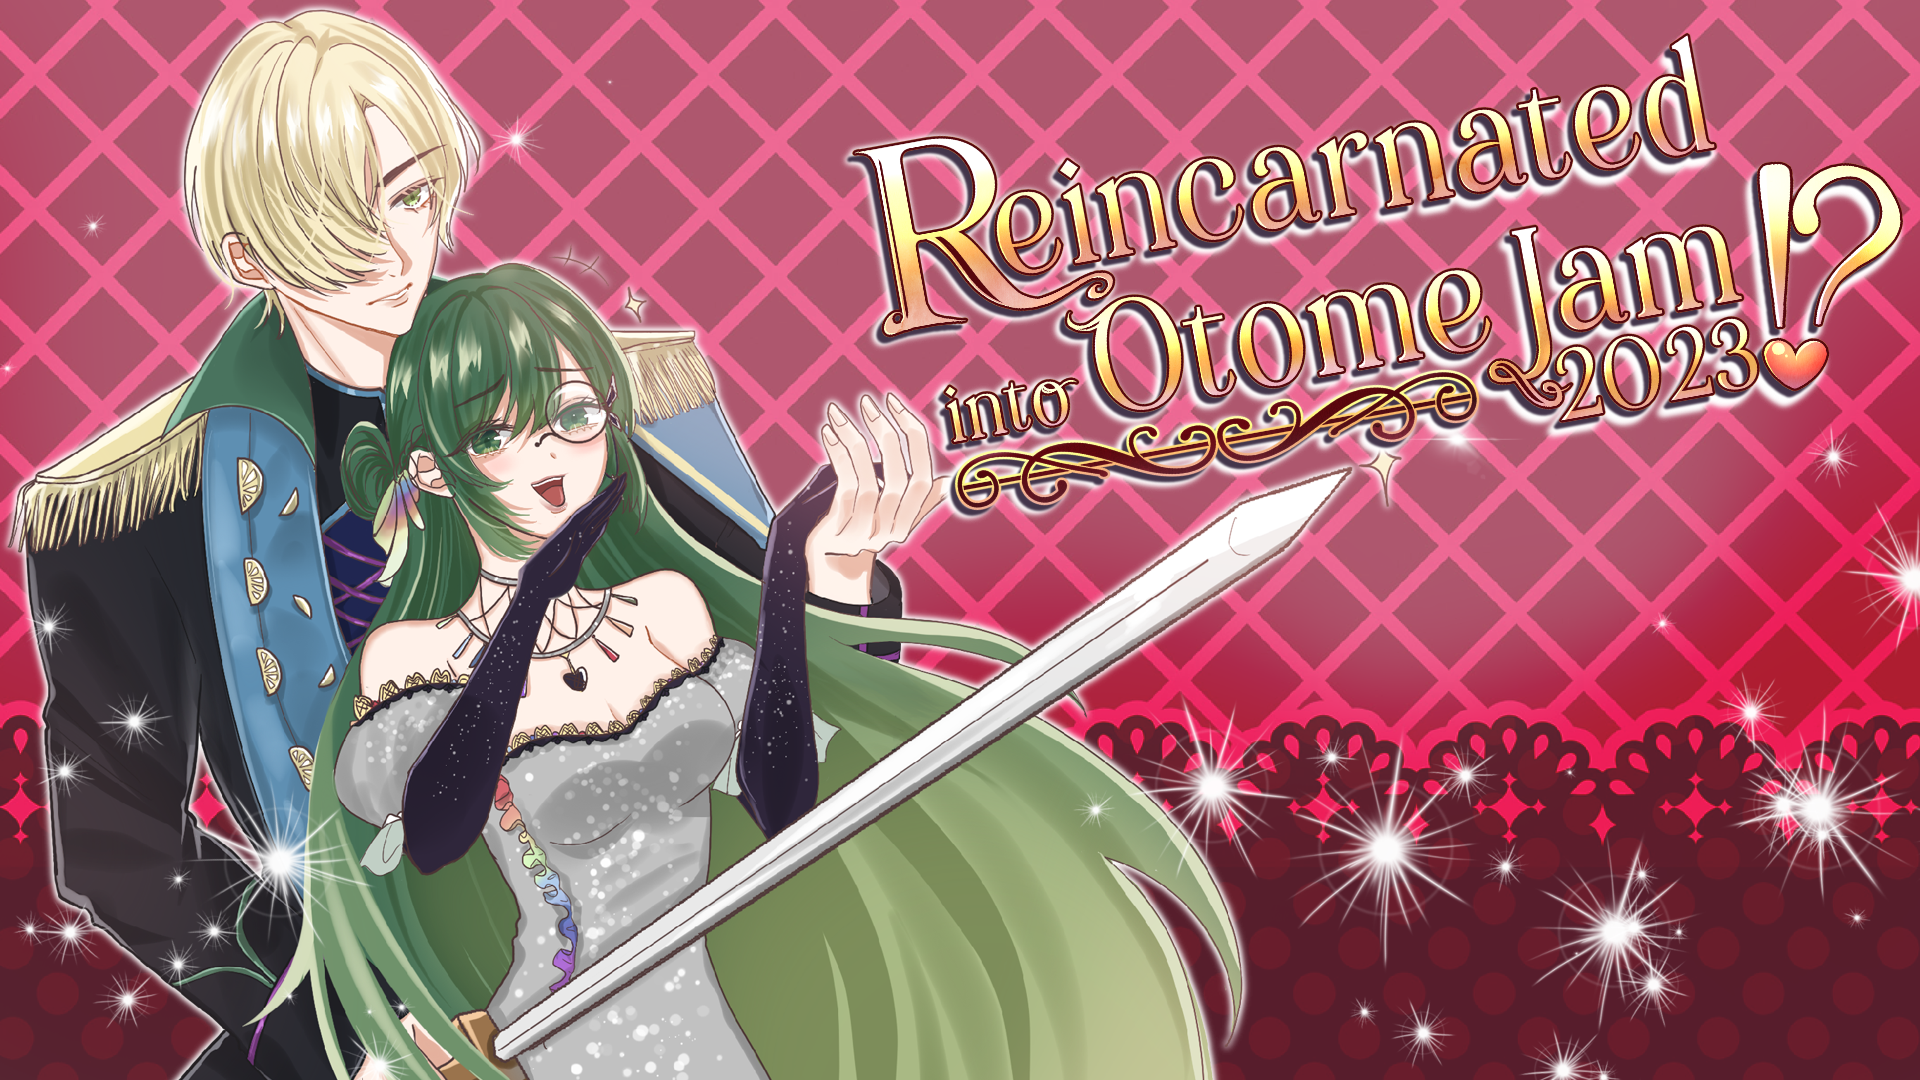 Otome Games  Charming Delusions